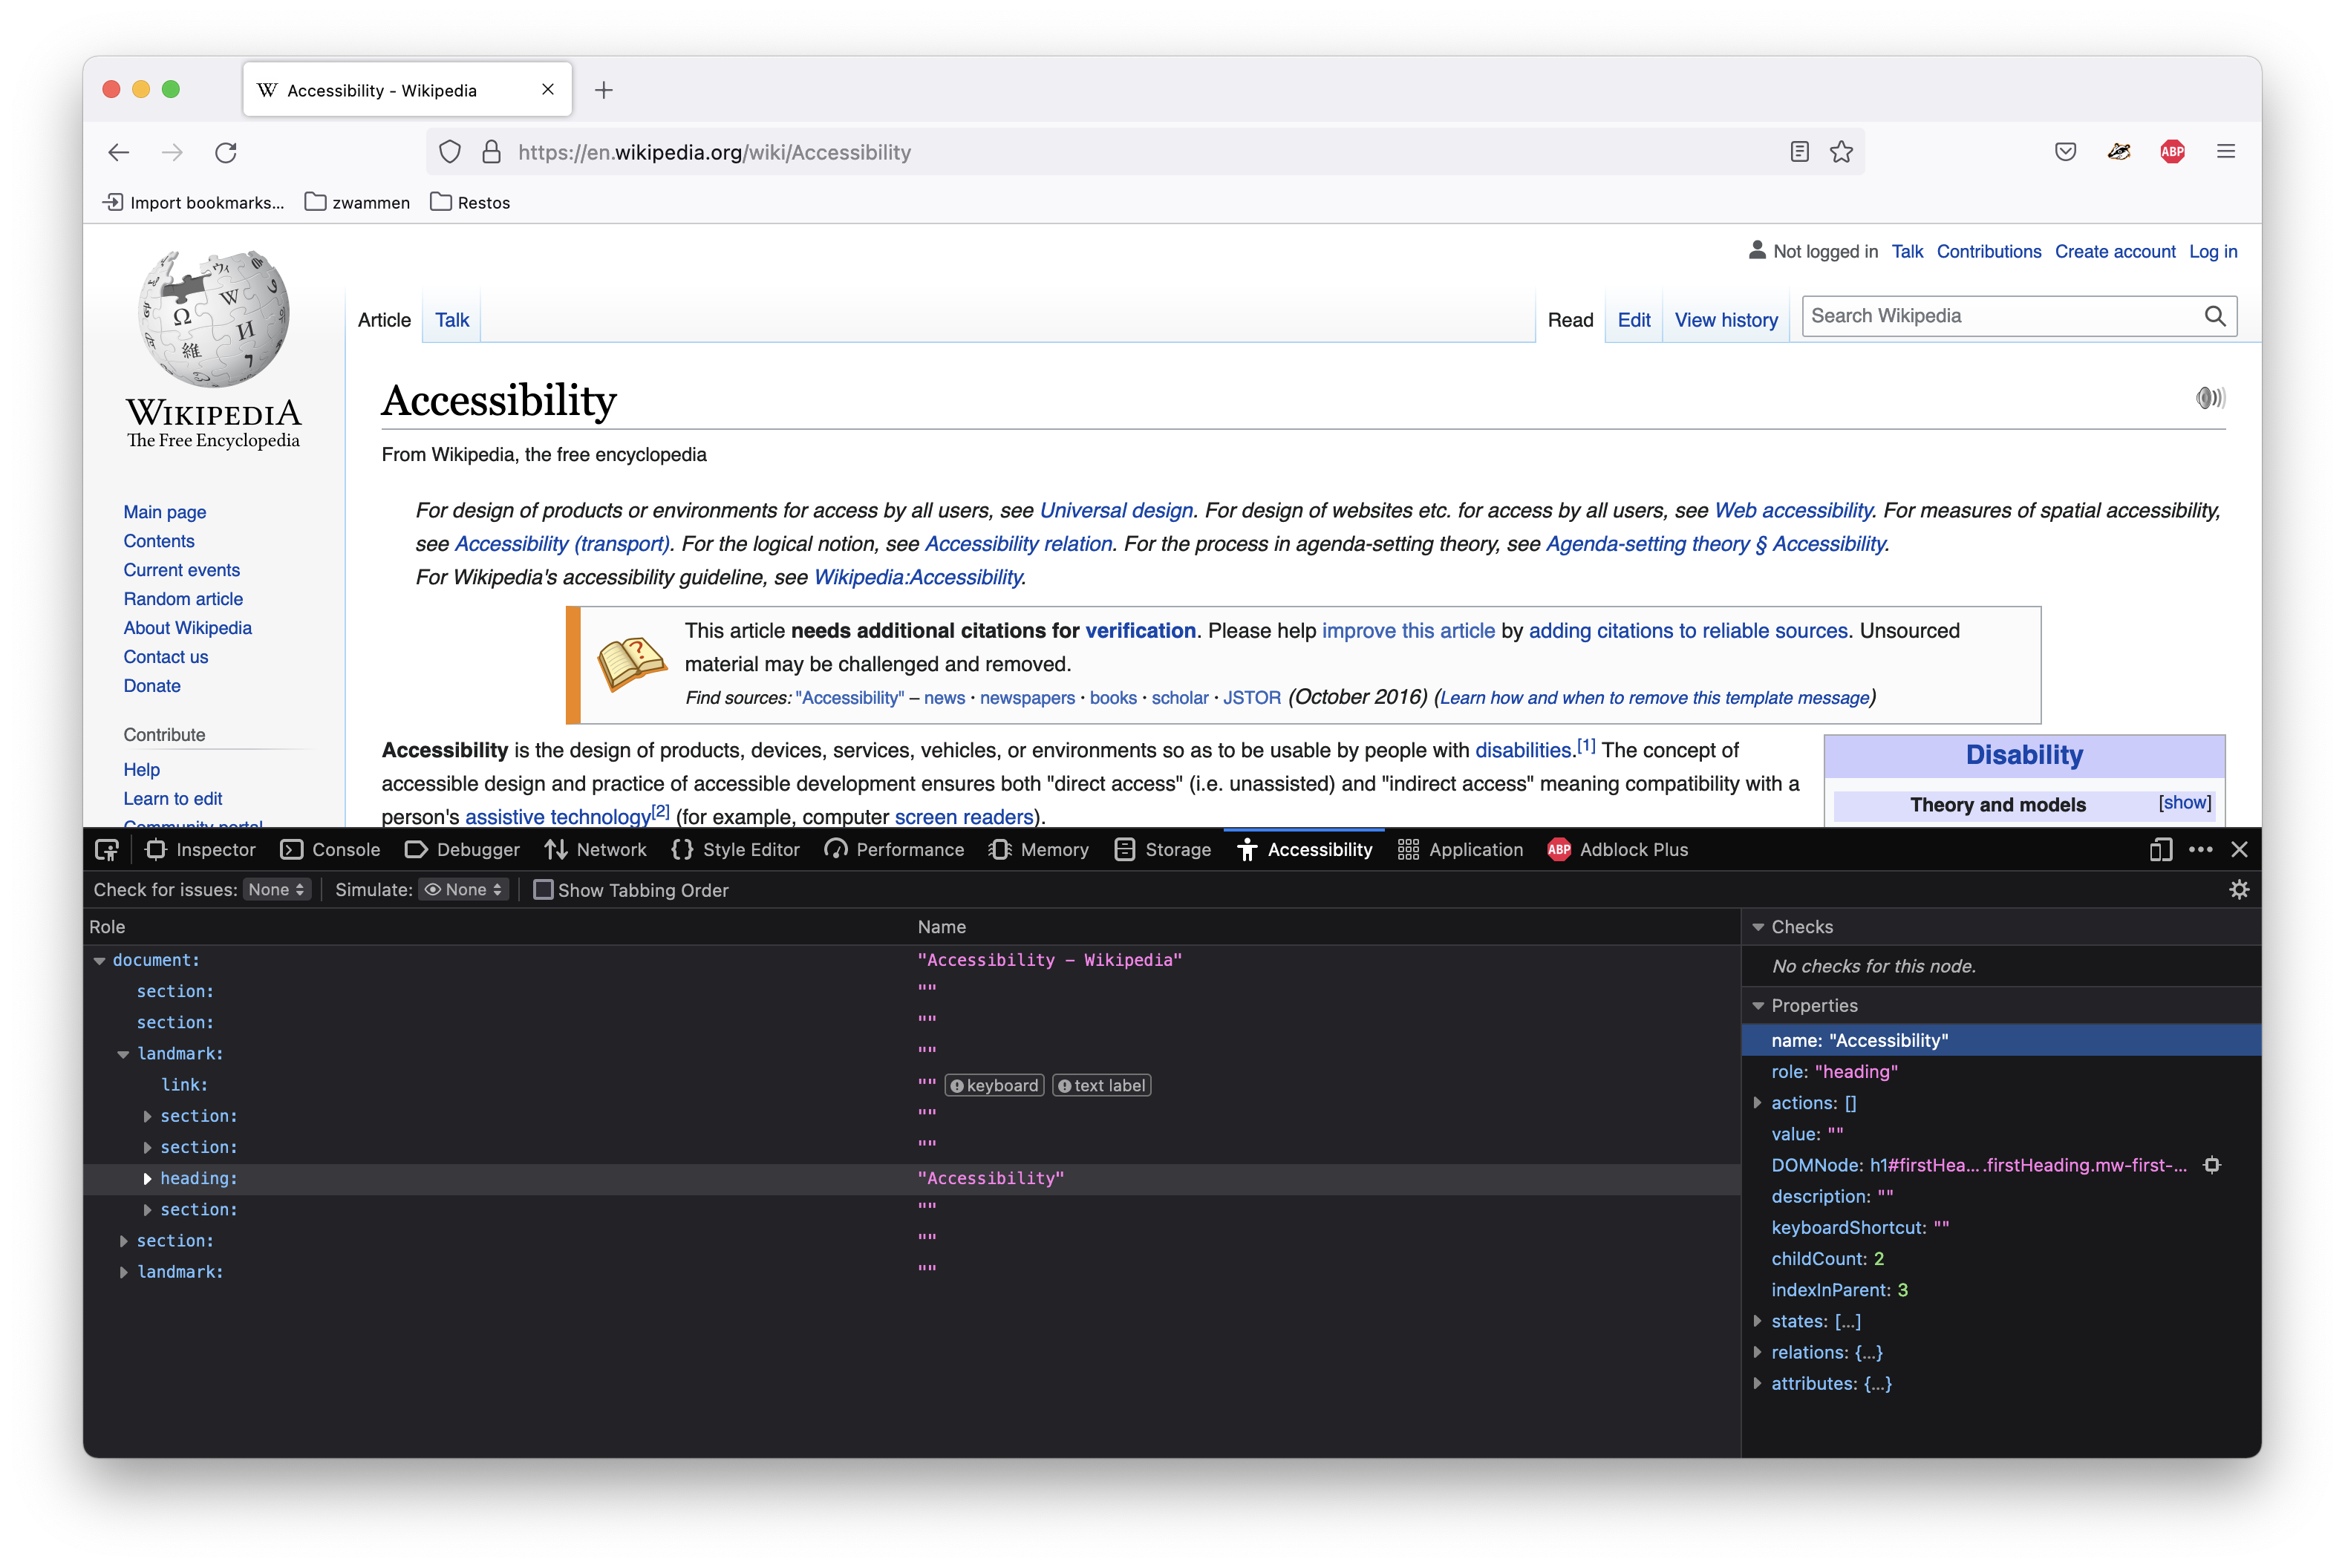 A Firefox web browser window showing the Wikipedia page for 'Accessibility'. The Firefox developer console is open, with the Accessibility tab selected